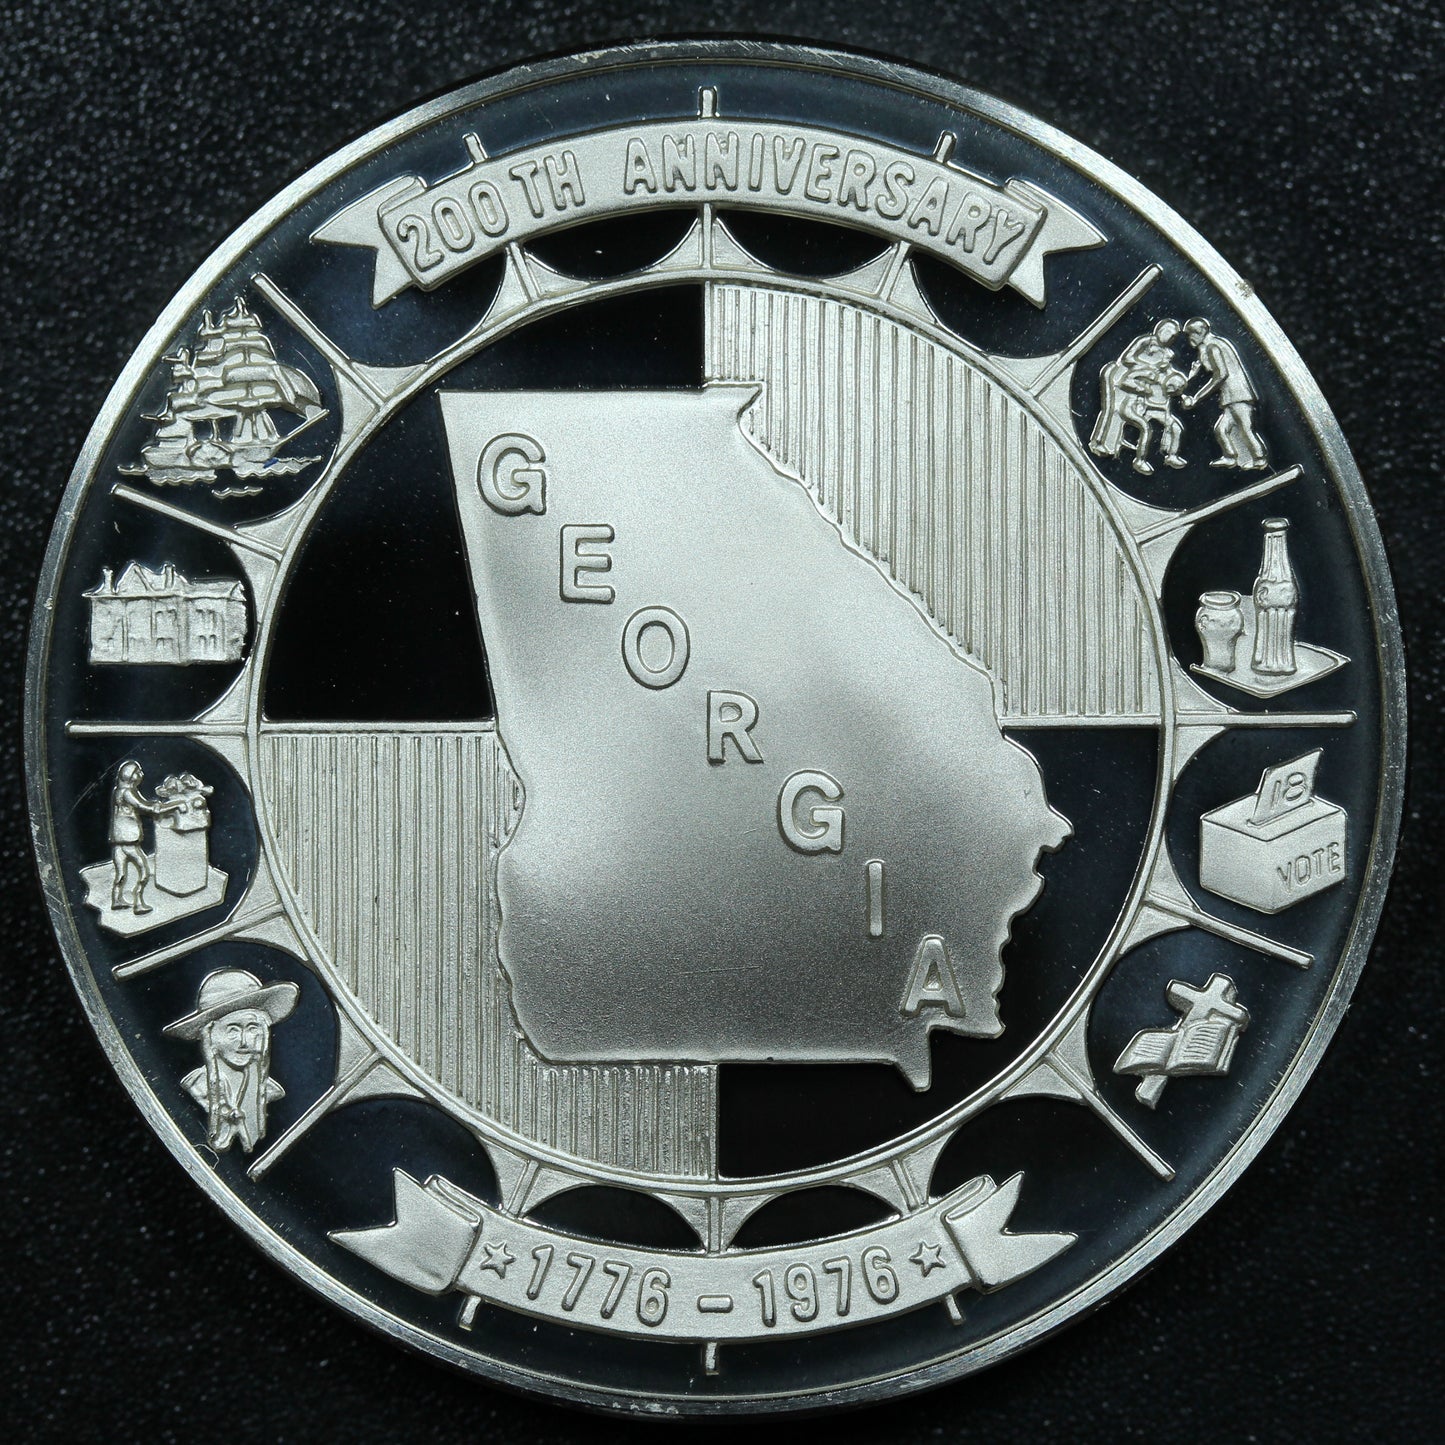 Franklin Mint 50 State Bicentennial Medal - GEORGIA Sterling Silver Proof w/ Capsule